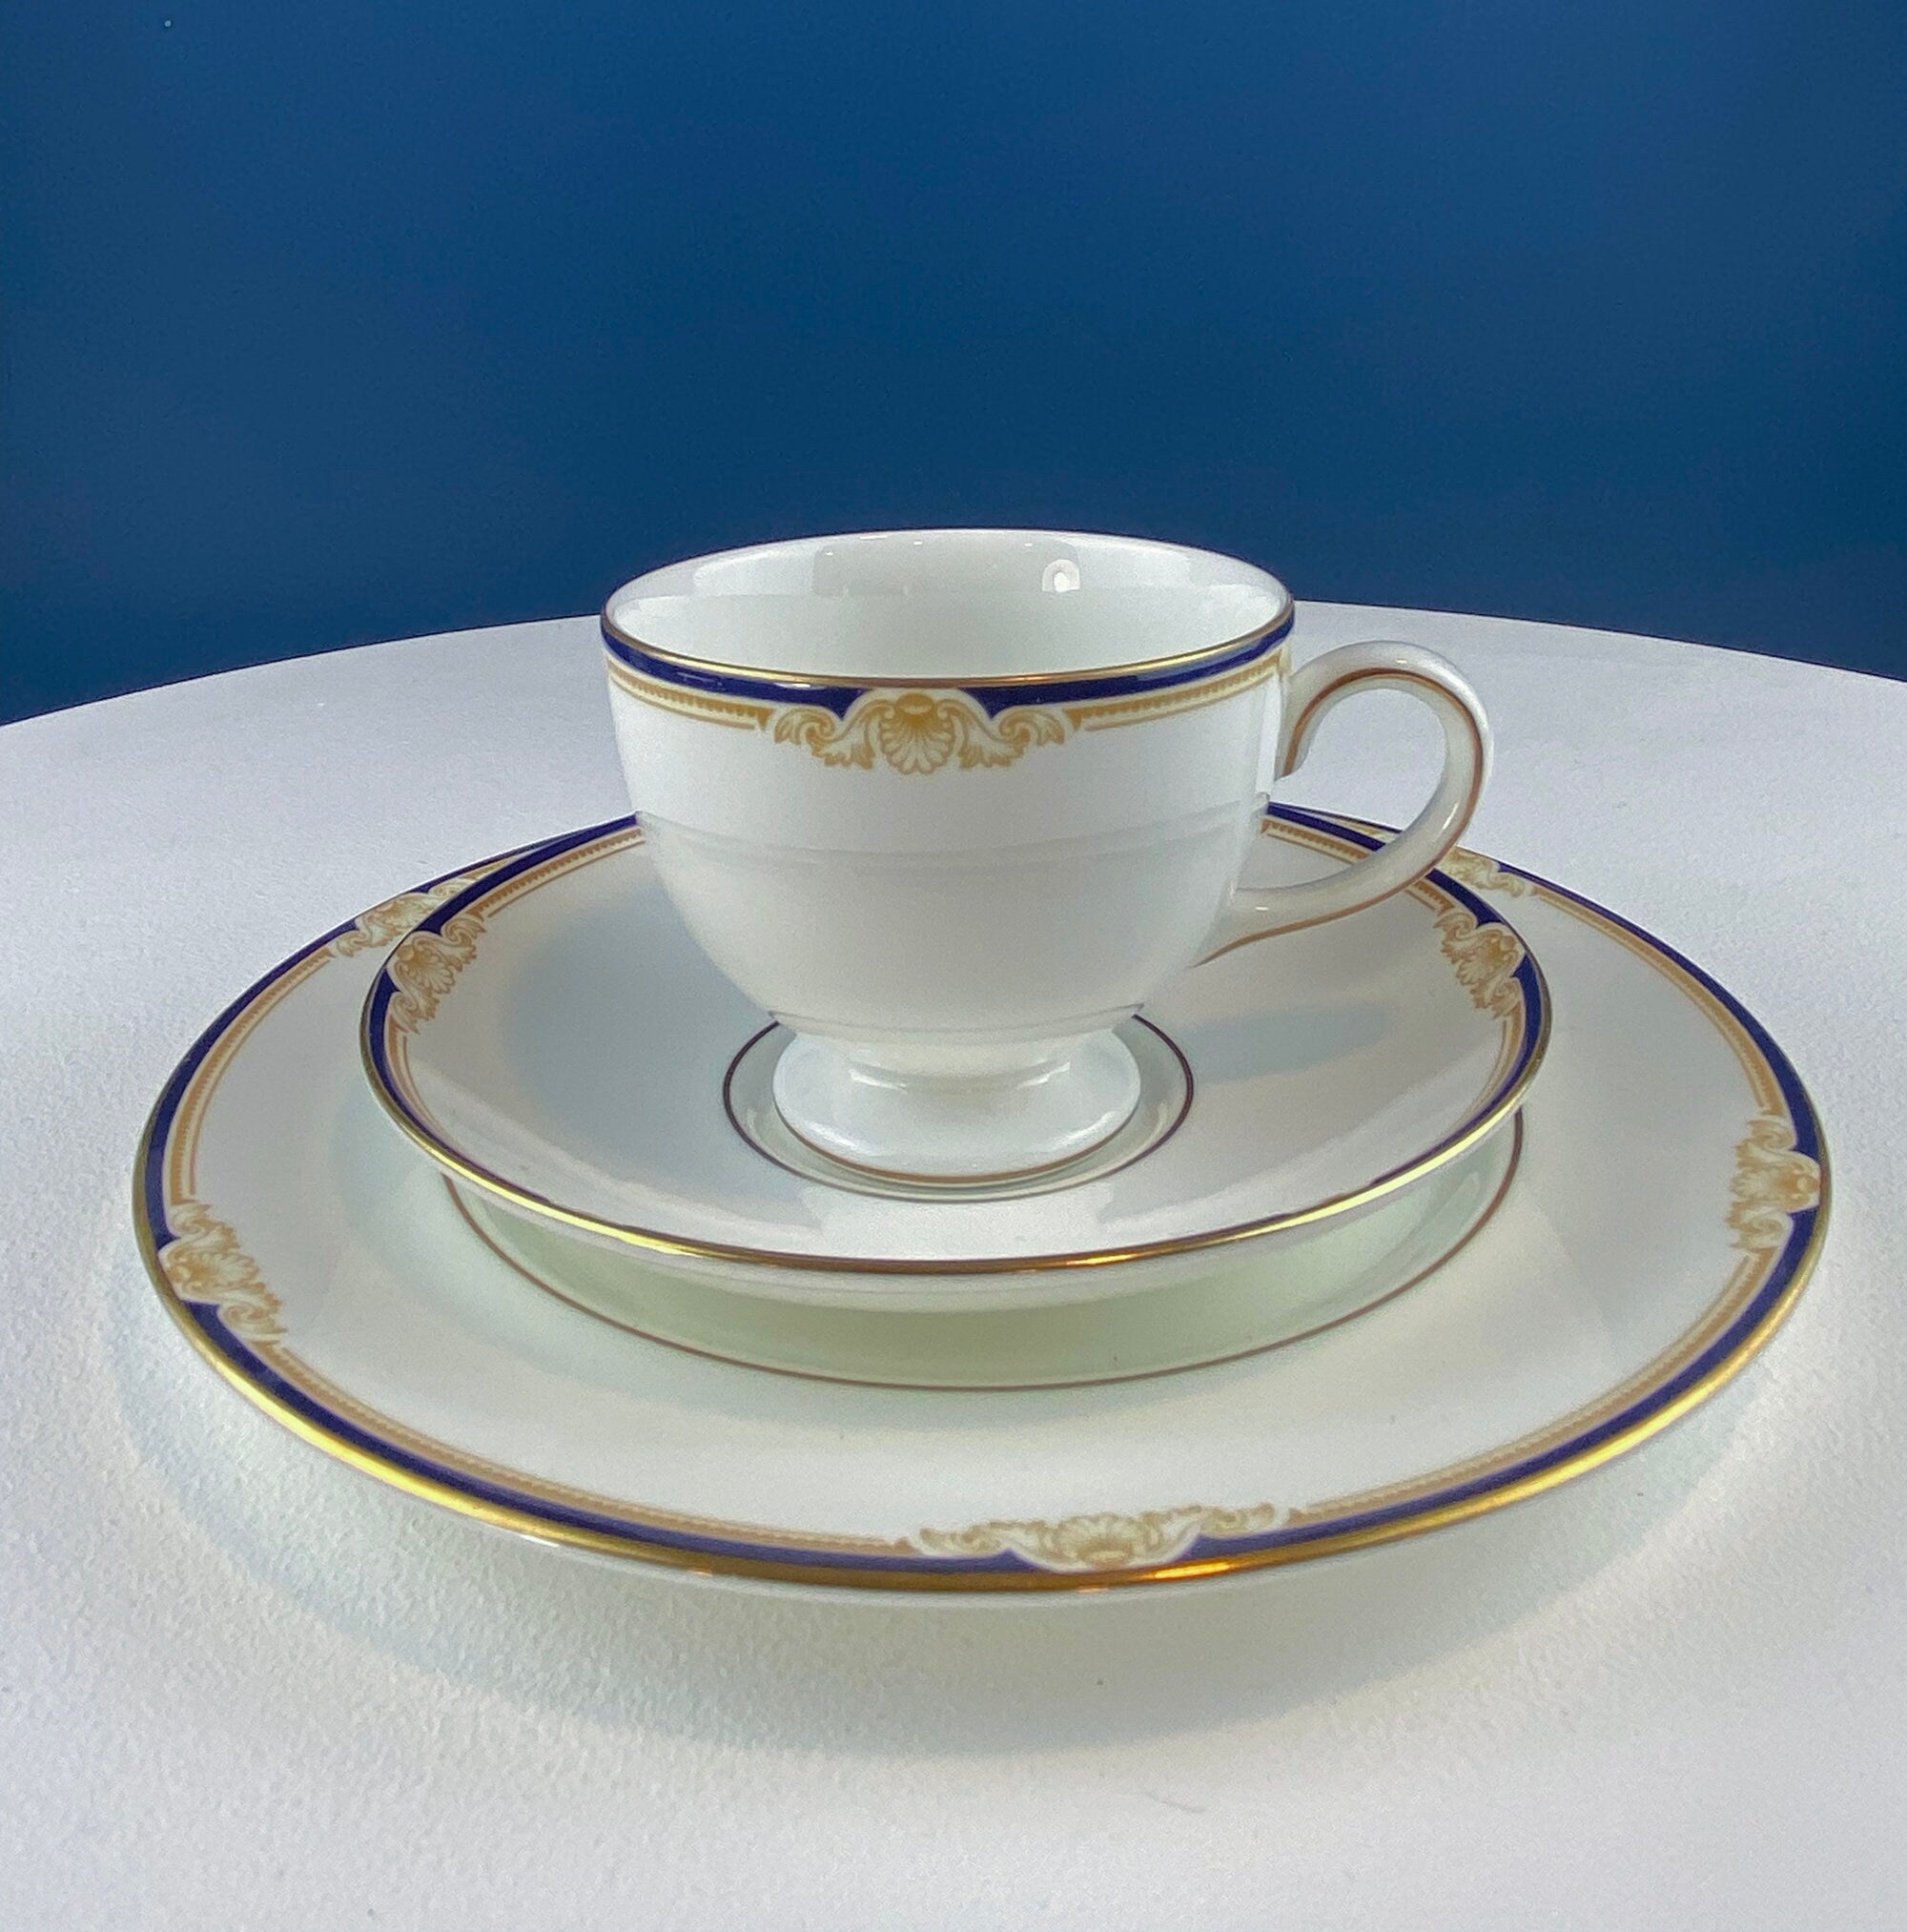 Classic Wedgewood Cavendish Classic Dinnerware Set. 4 Settings: Dinner,  Salad, Dessert/Bread Plates, Cups and Saucers. 20 piece China.